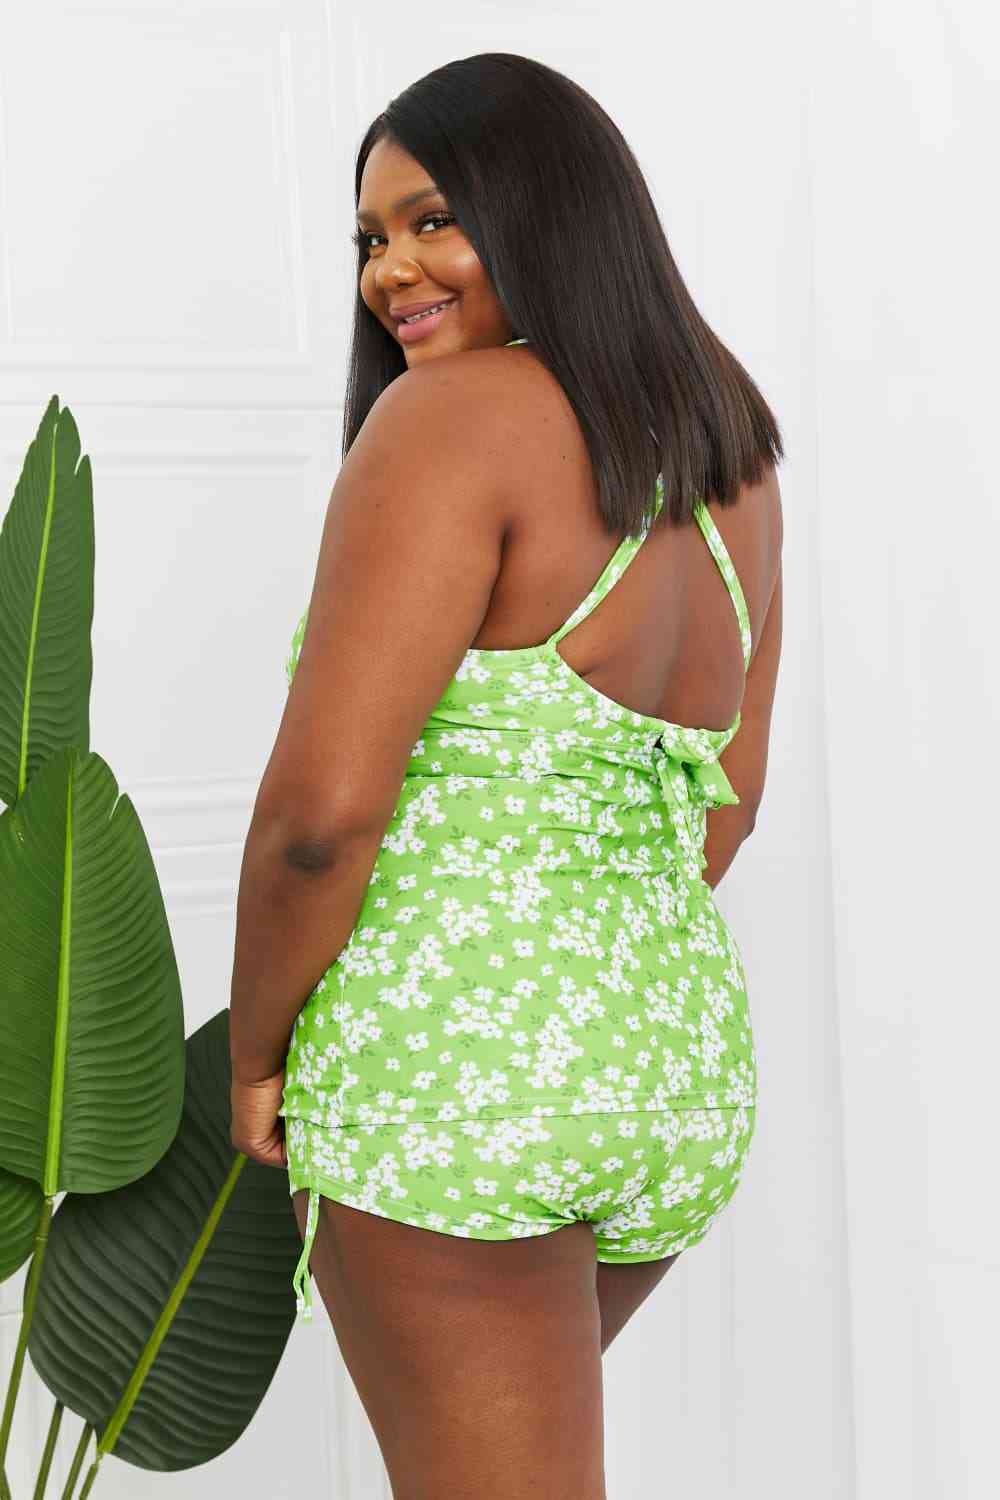 Marina West Swim By The Shore Full Size Two-Piece Swimsuit in Blossom Green - SELFTRITSS